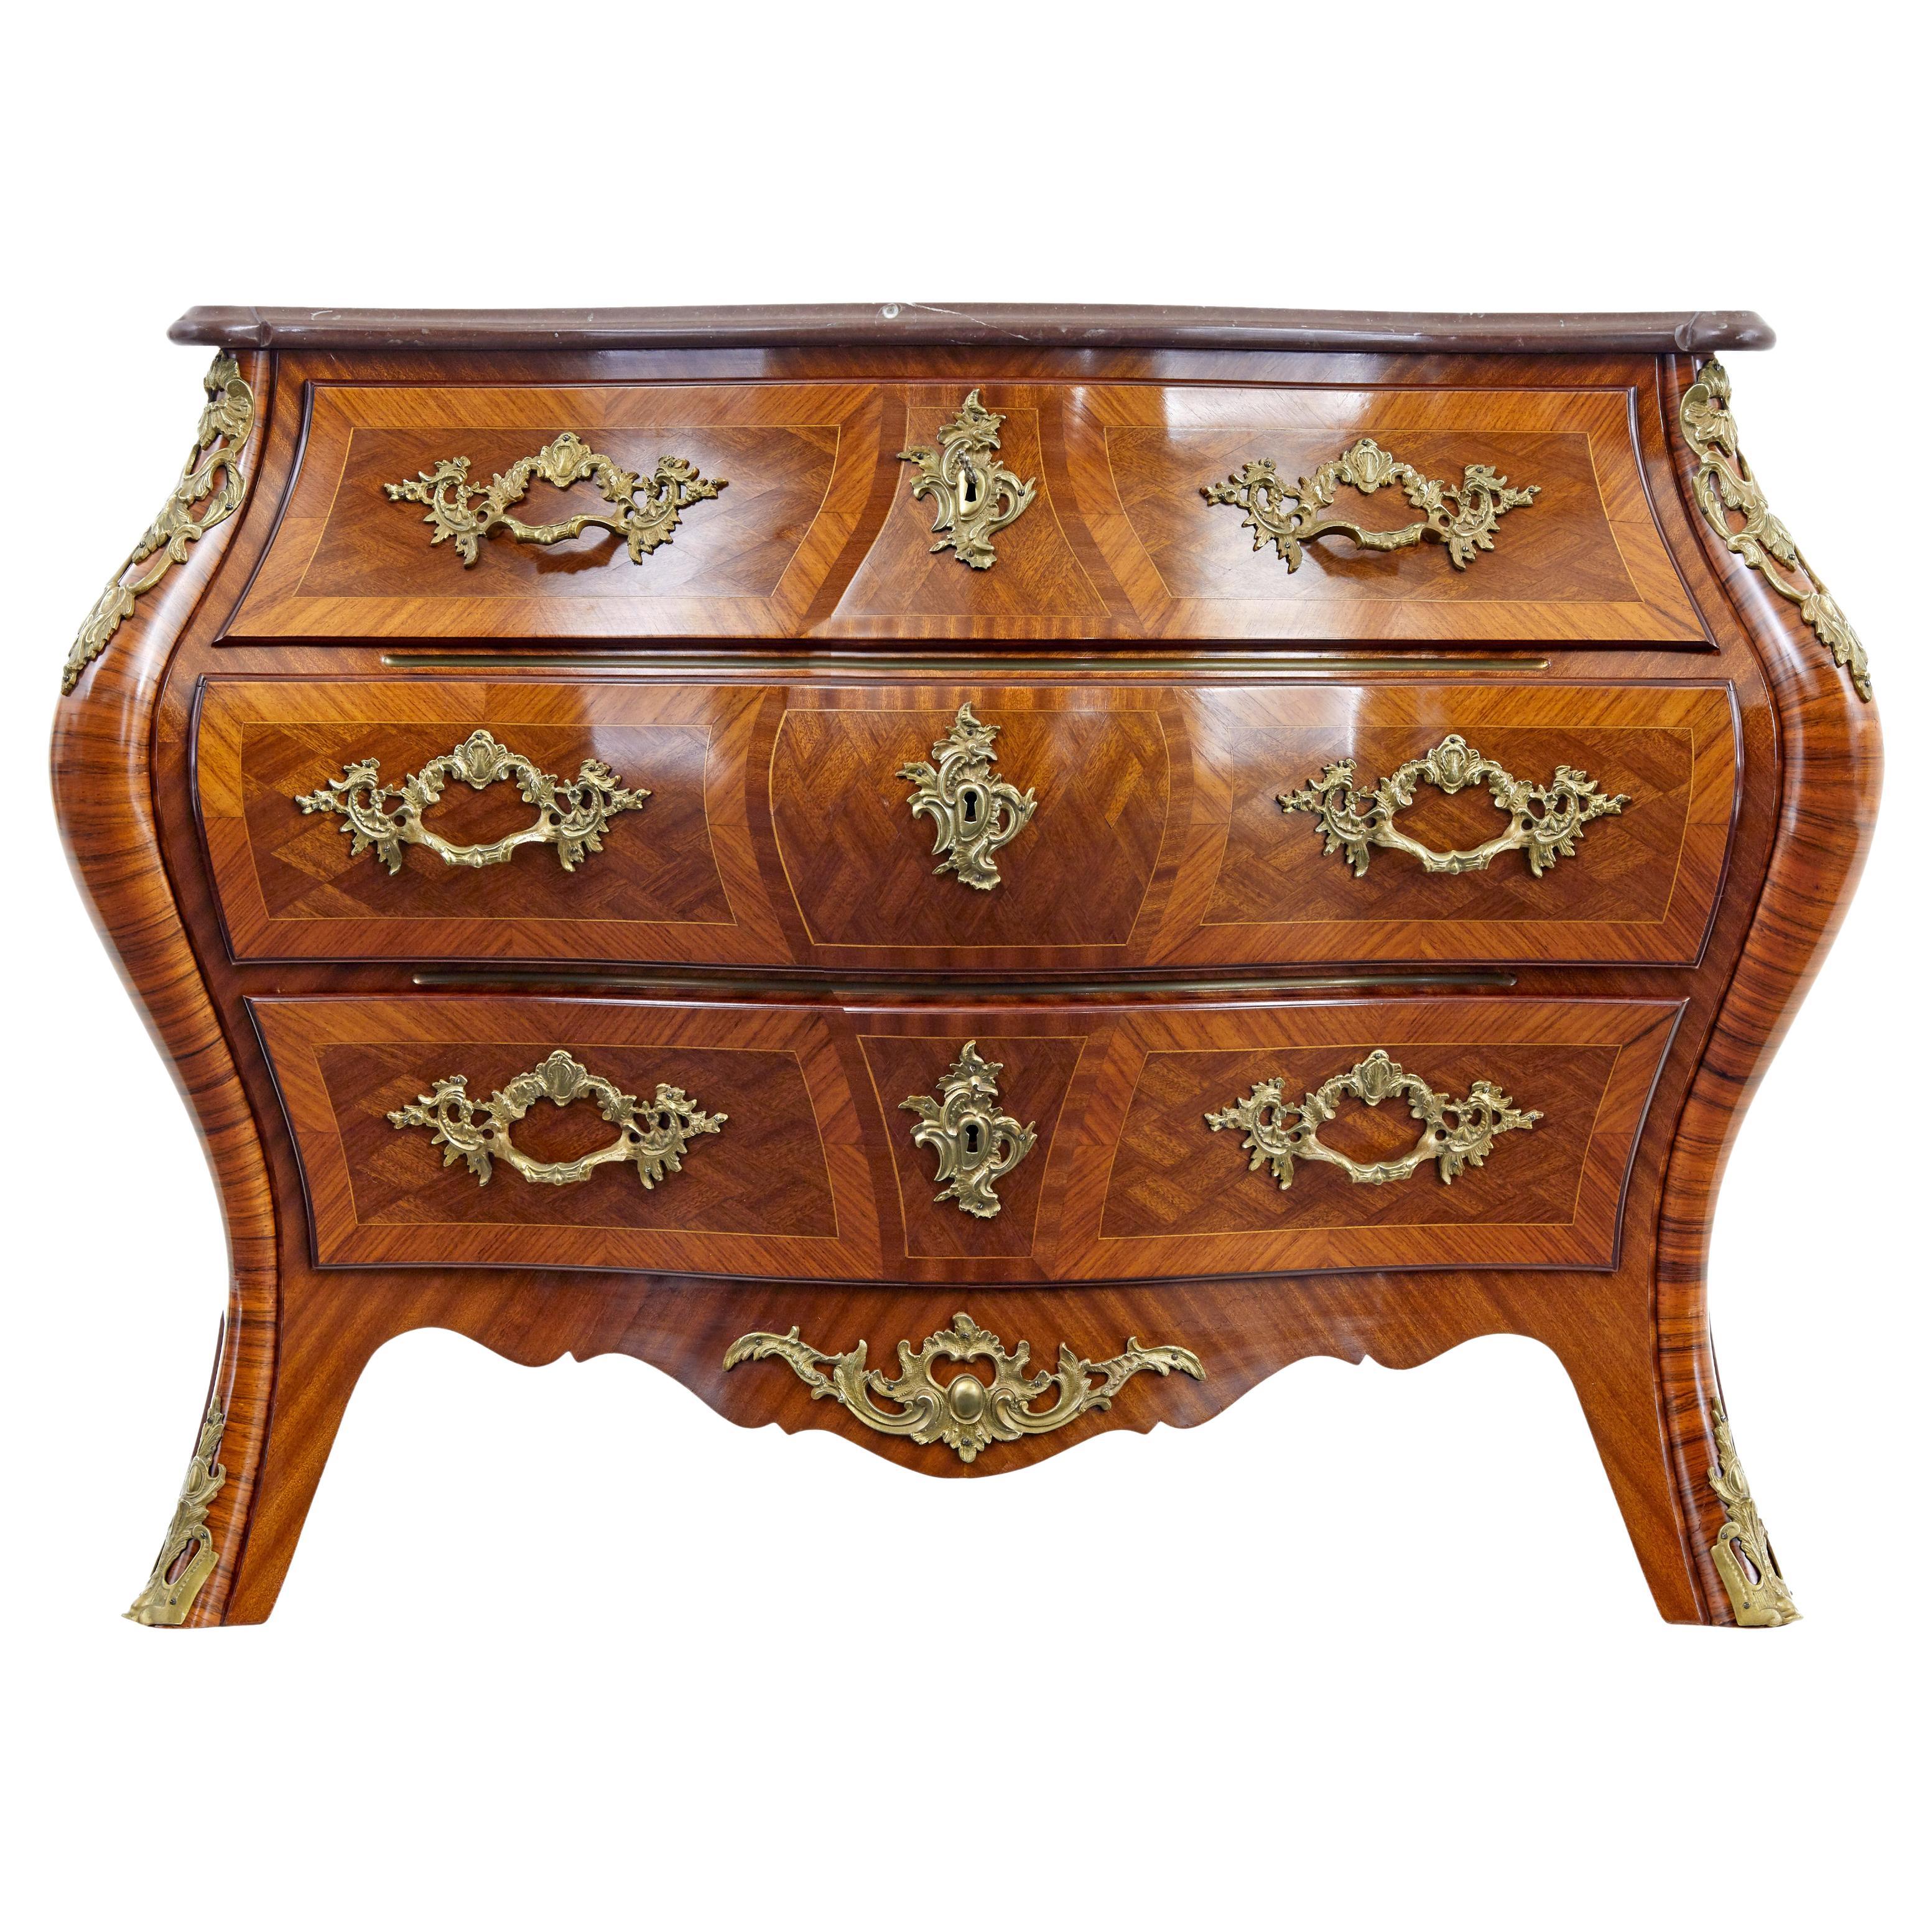 Mid 20th century rococo revival bombe kingwood mahogany chest of drawers For Sale